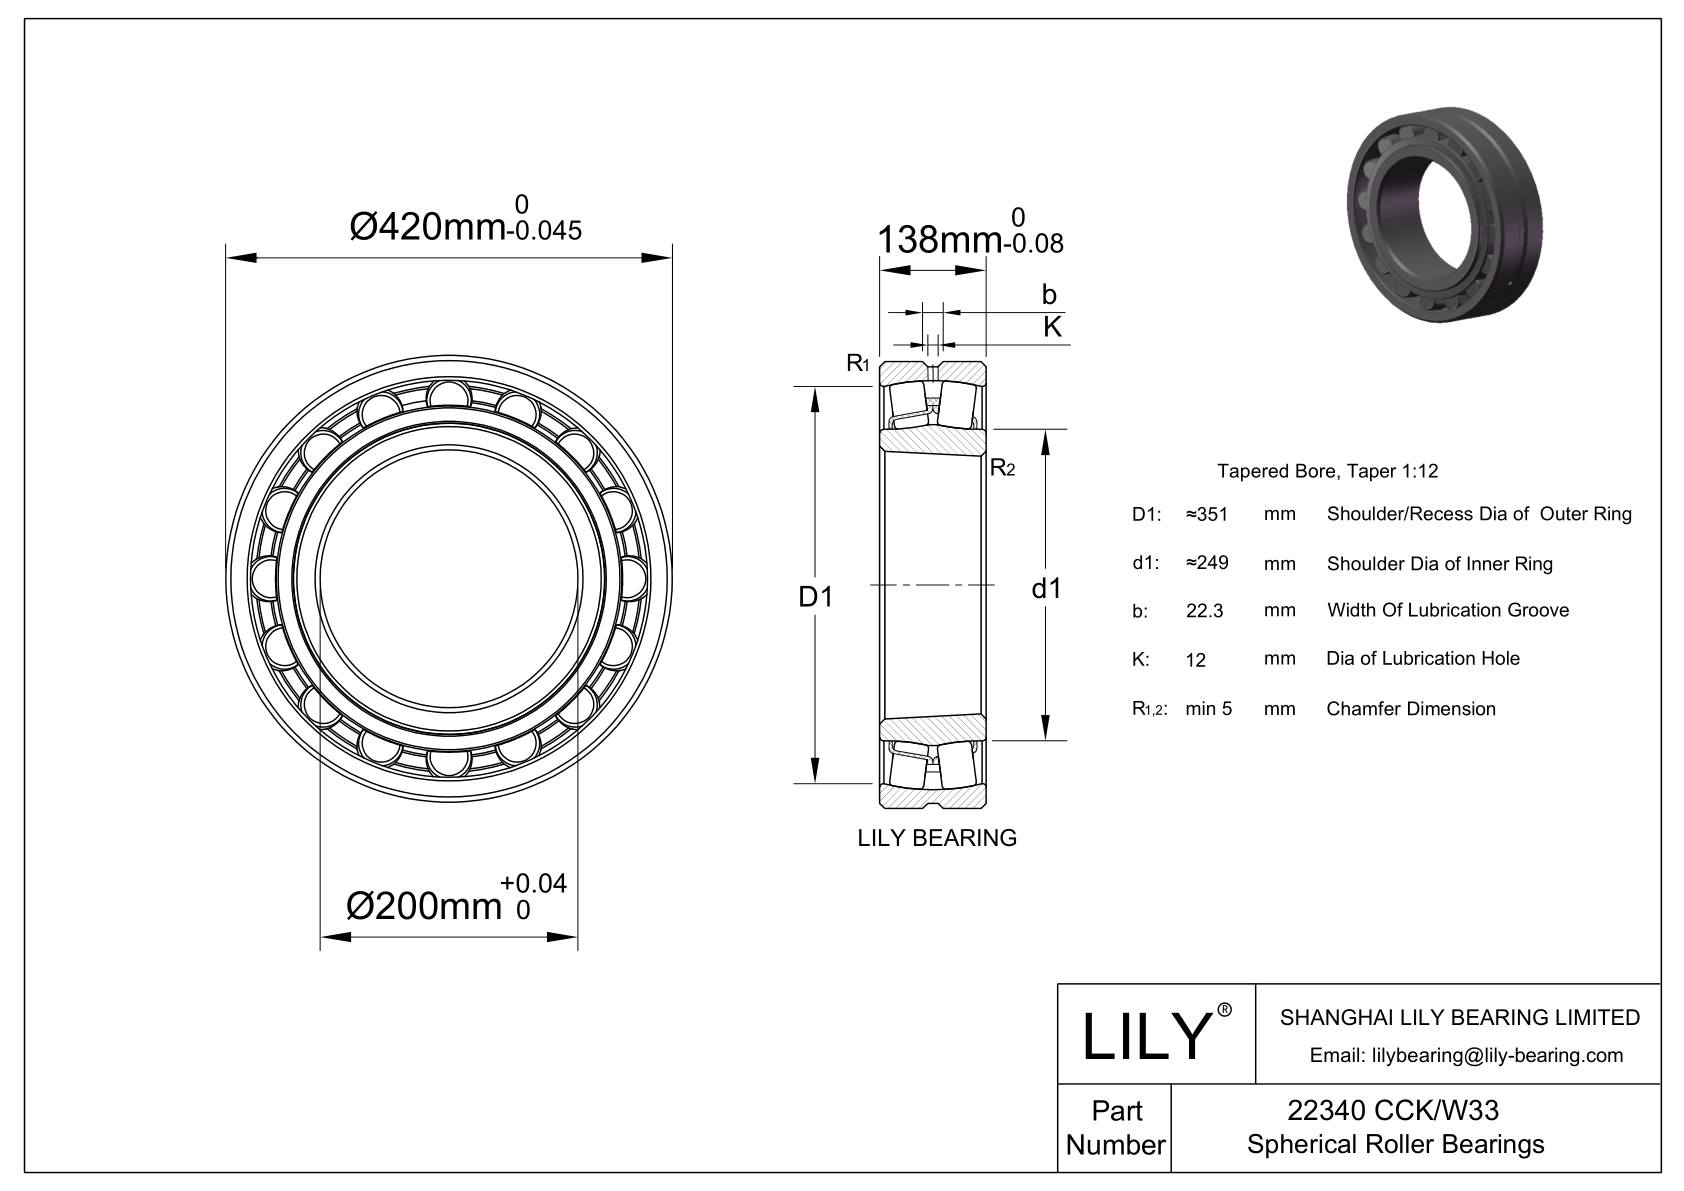 22340 CCK/W33 Double Row Spherical Roller Bearing cad drawing